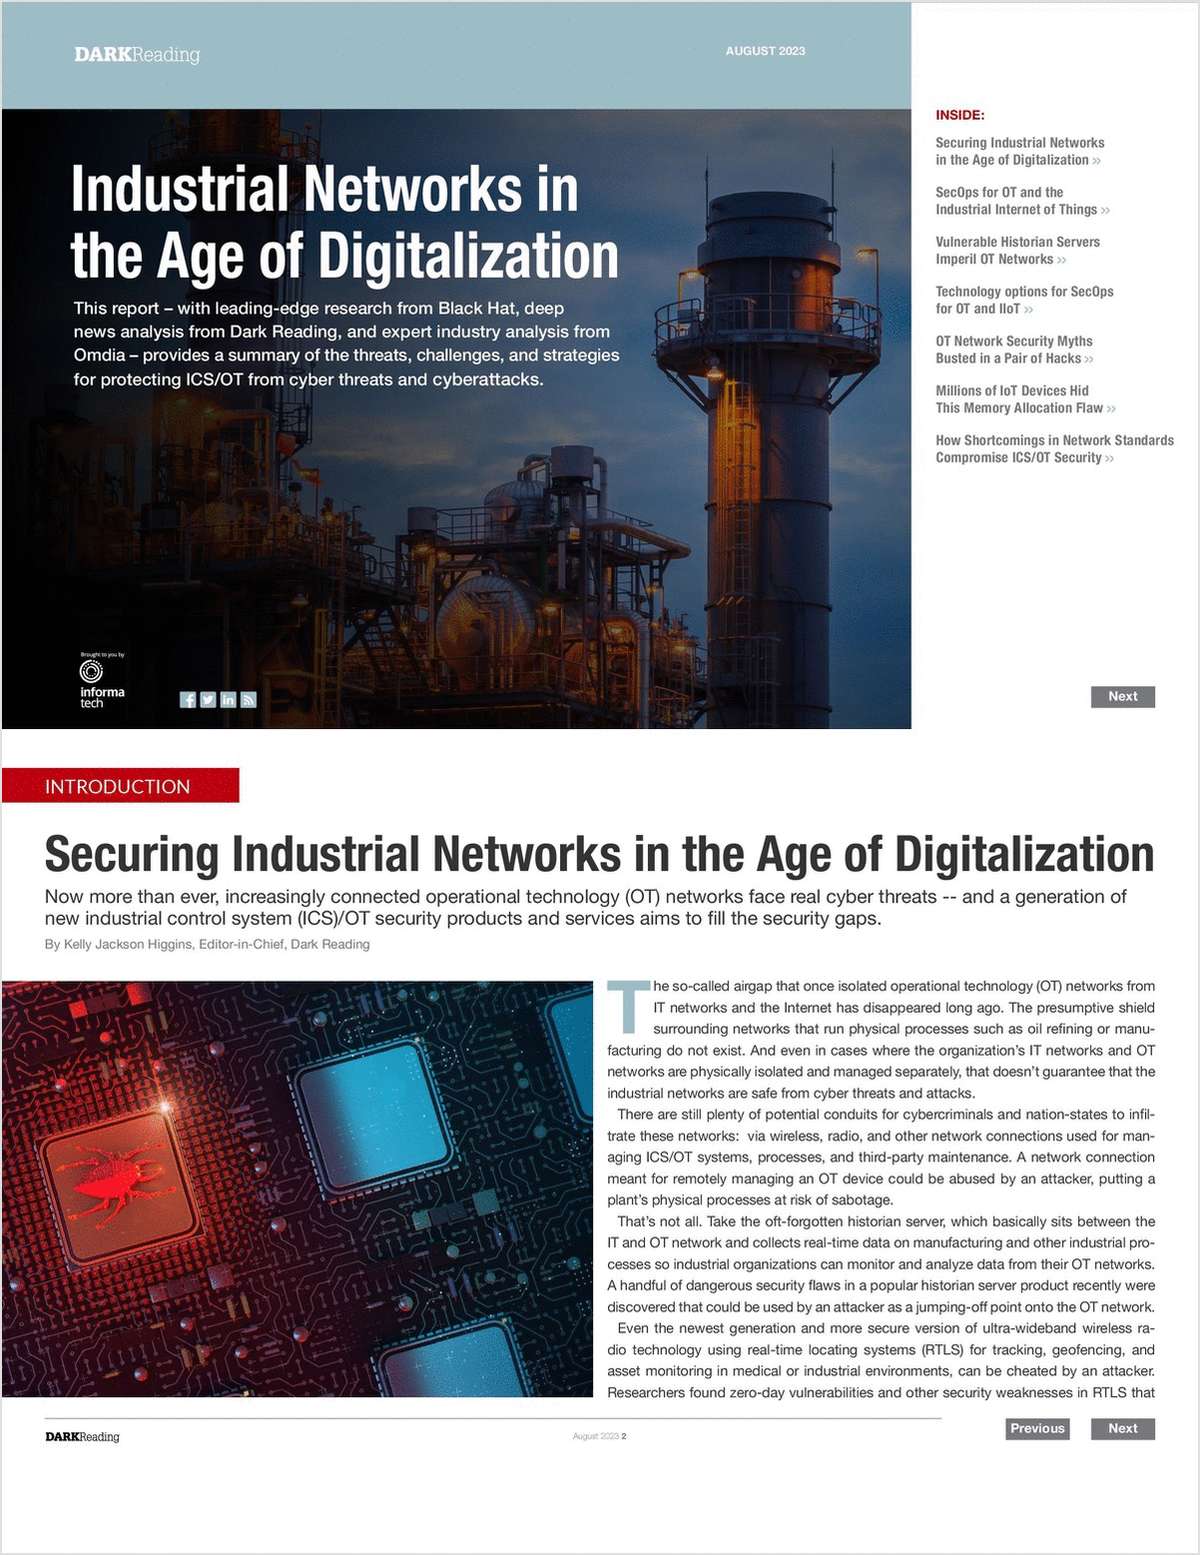 Industrial Networks in the Age of Digitalization